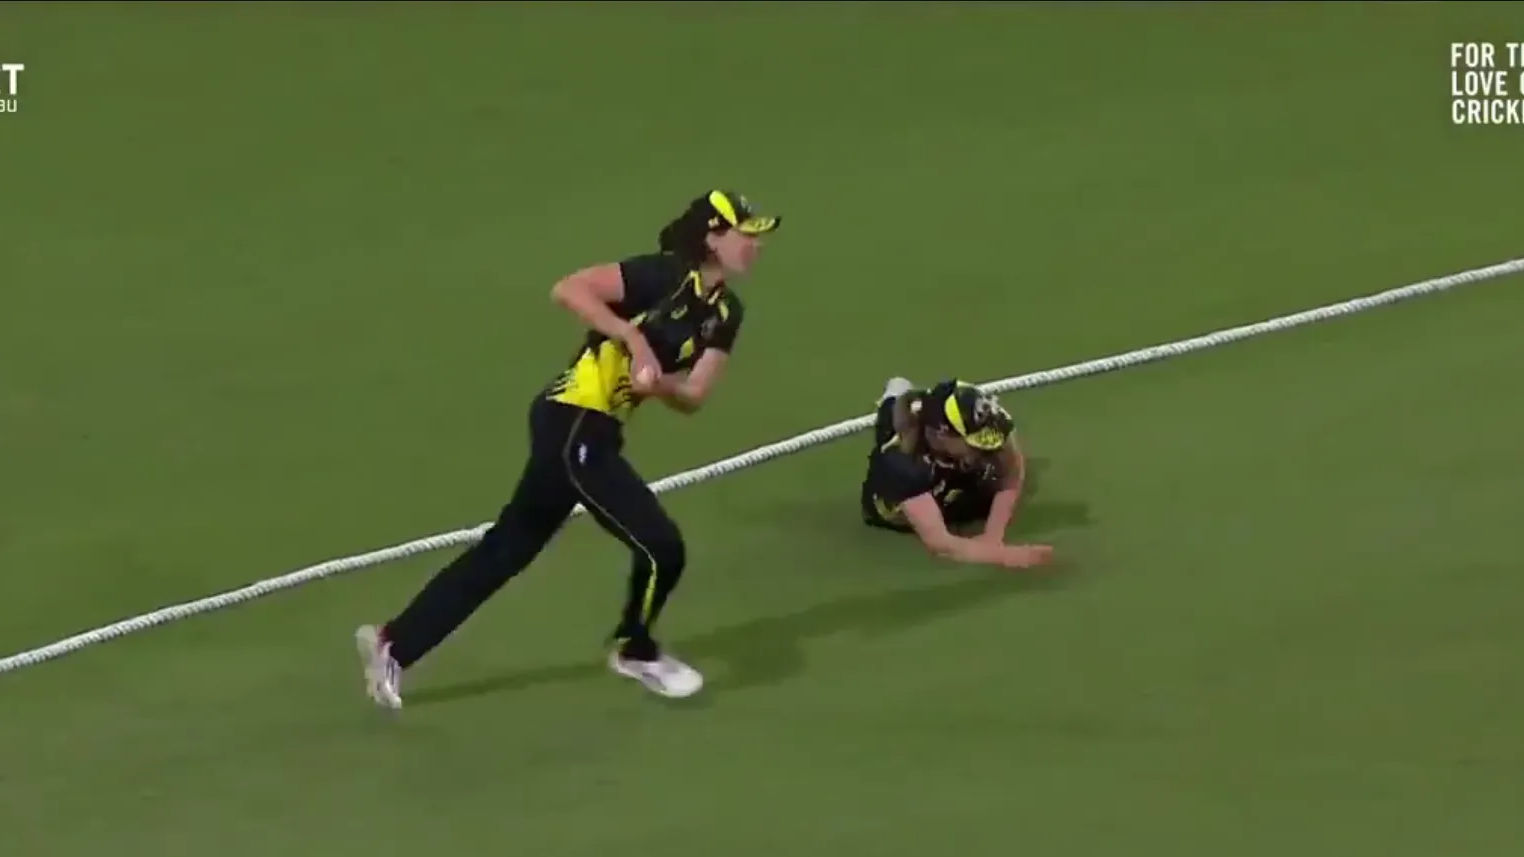 Perry, McGrath’s fielding masterclass to effect run out. Watch